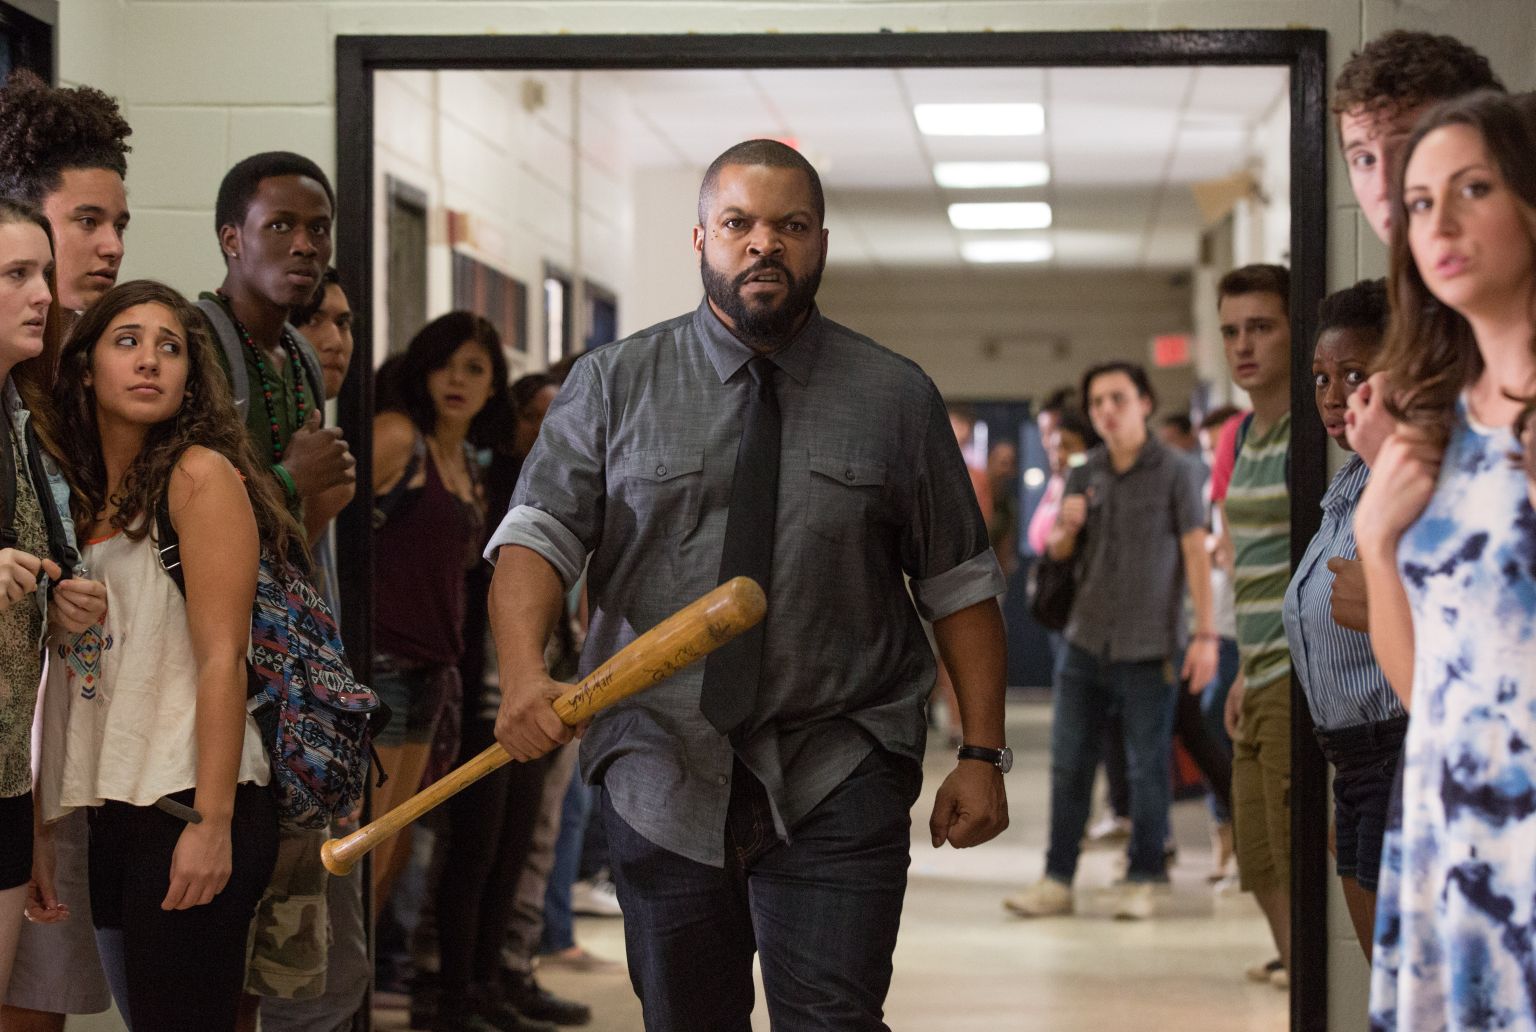 Ice Cube On New Movie 'Fist Fight' 'The Formula Works'